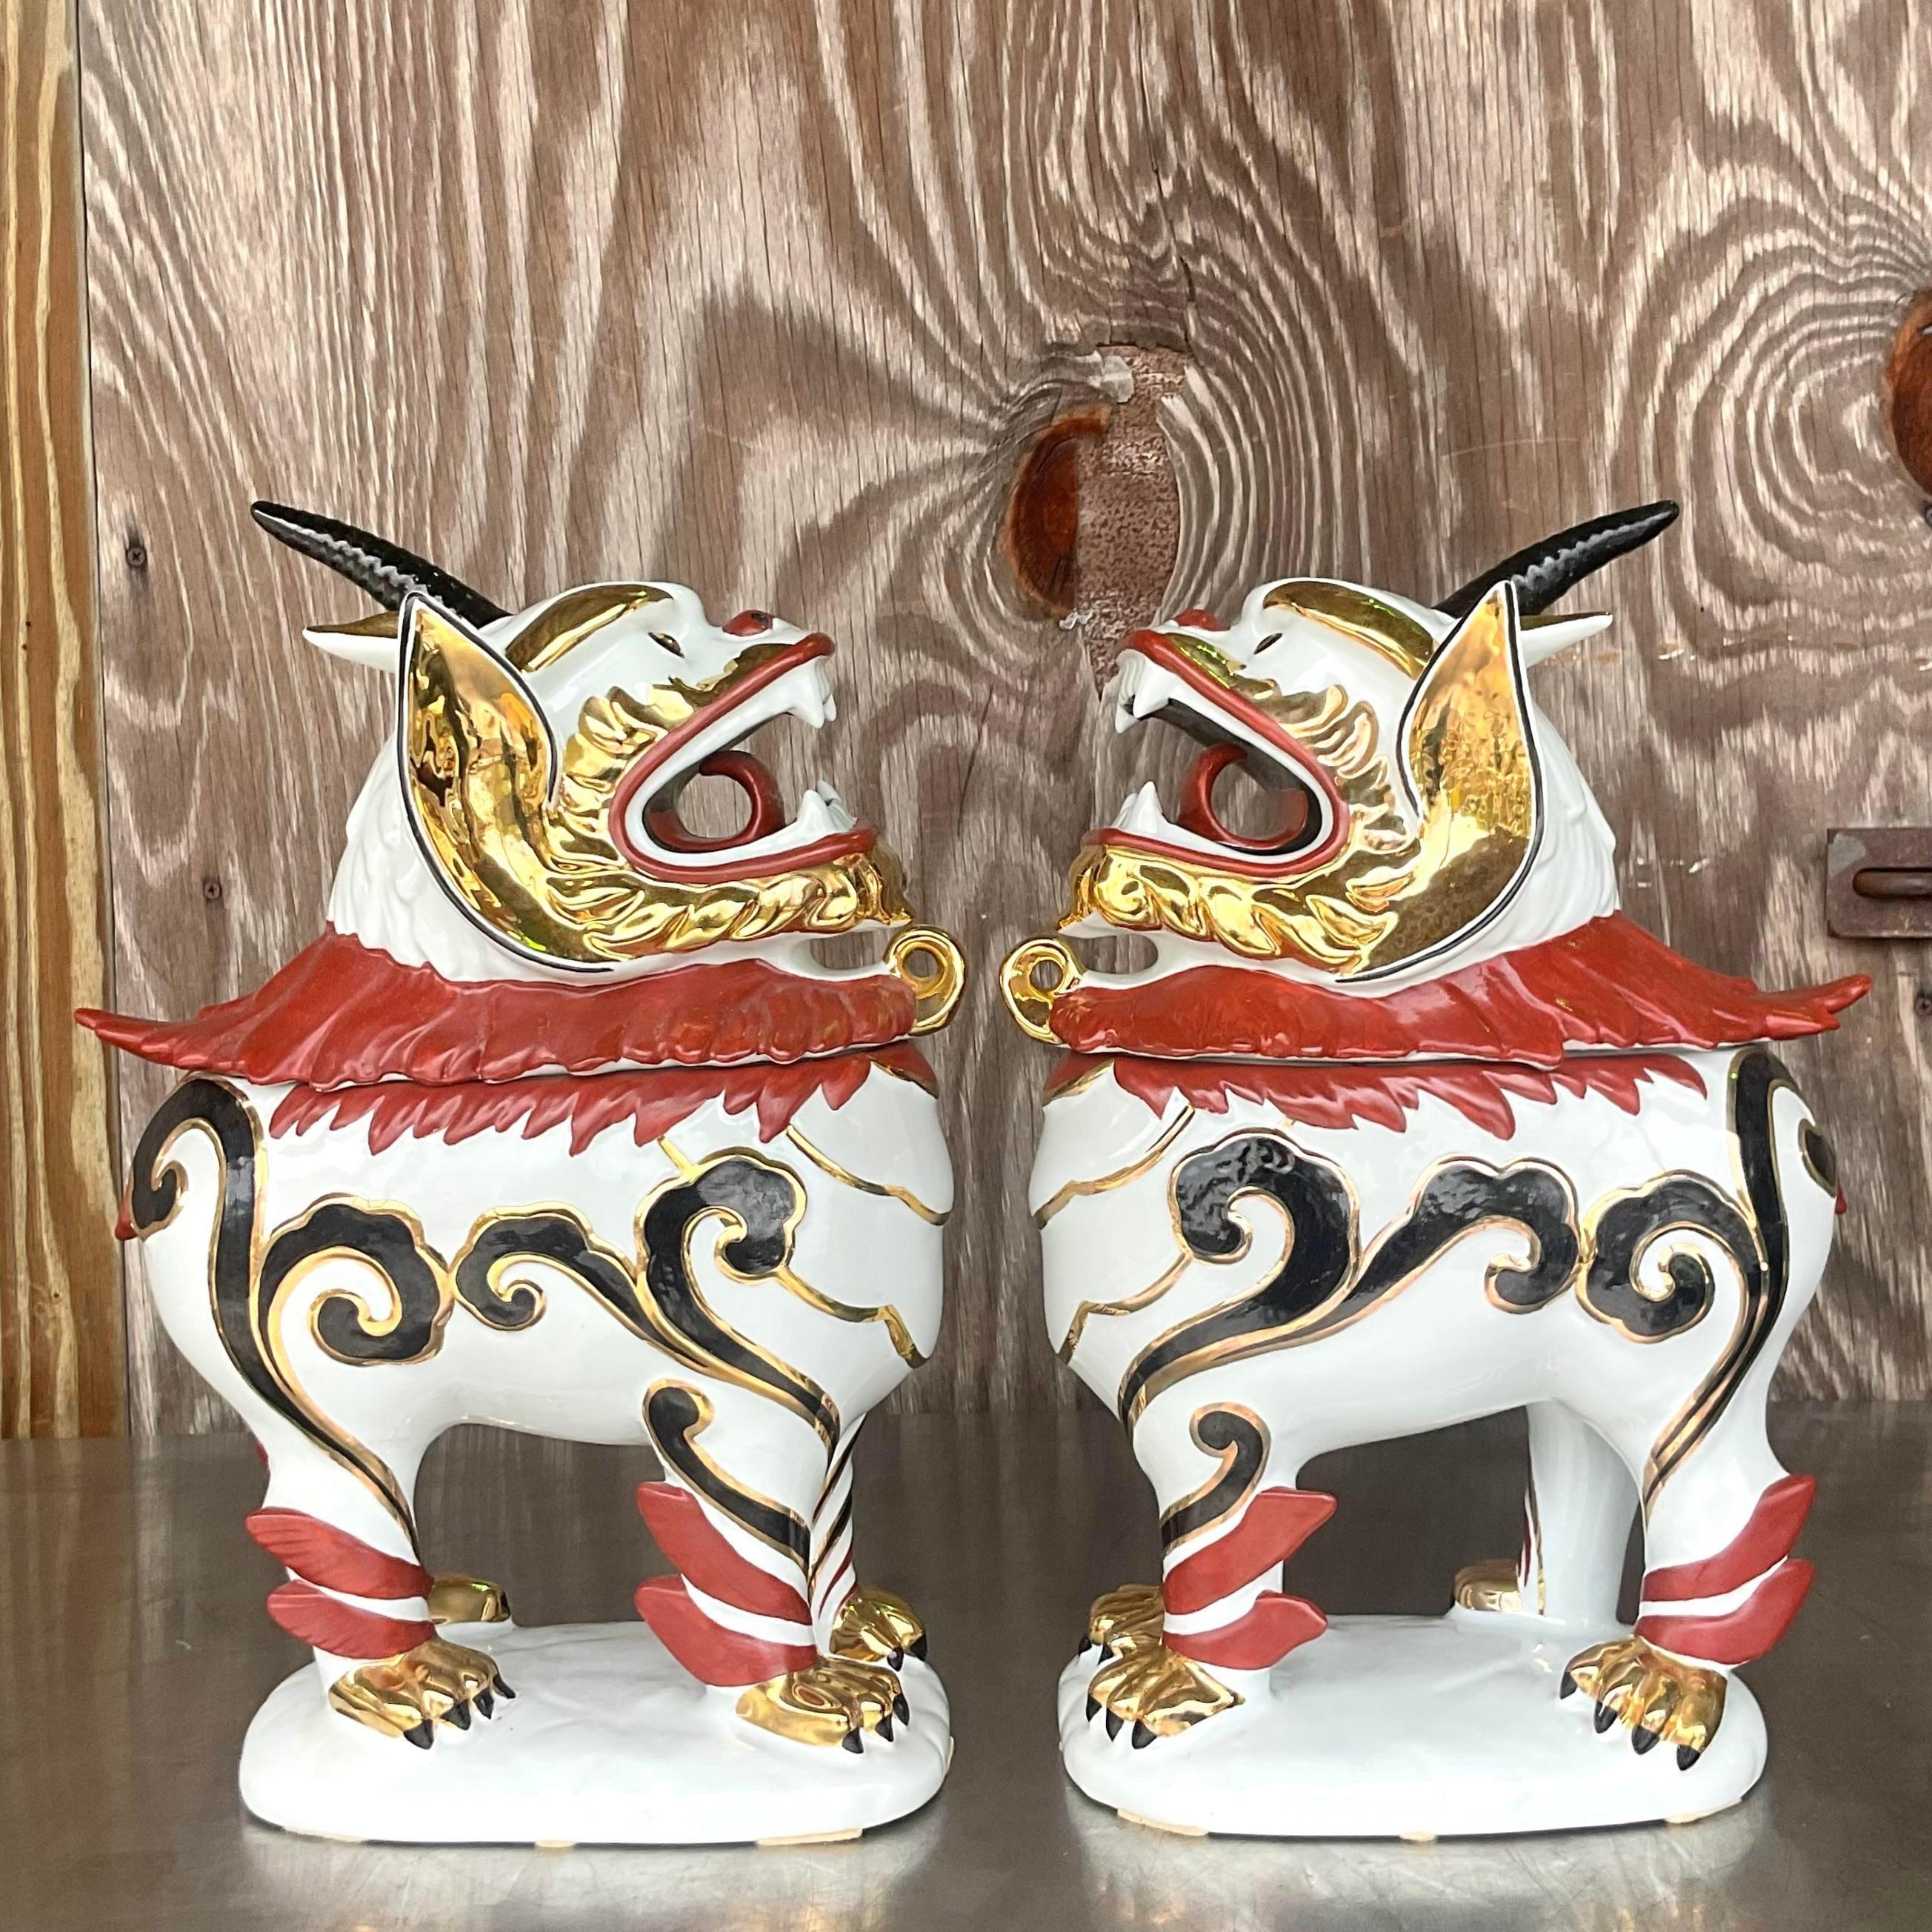 A striking pair of vintage lidded Asian Foo dogs. A chic hand painted porcelaine with gilt tipping. Lots of great secret storage for the family jewels. Made in Italy and marked on the bottom. Acquired from a Palm Beach estate.